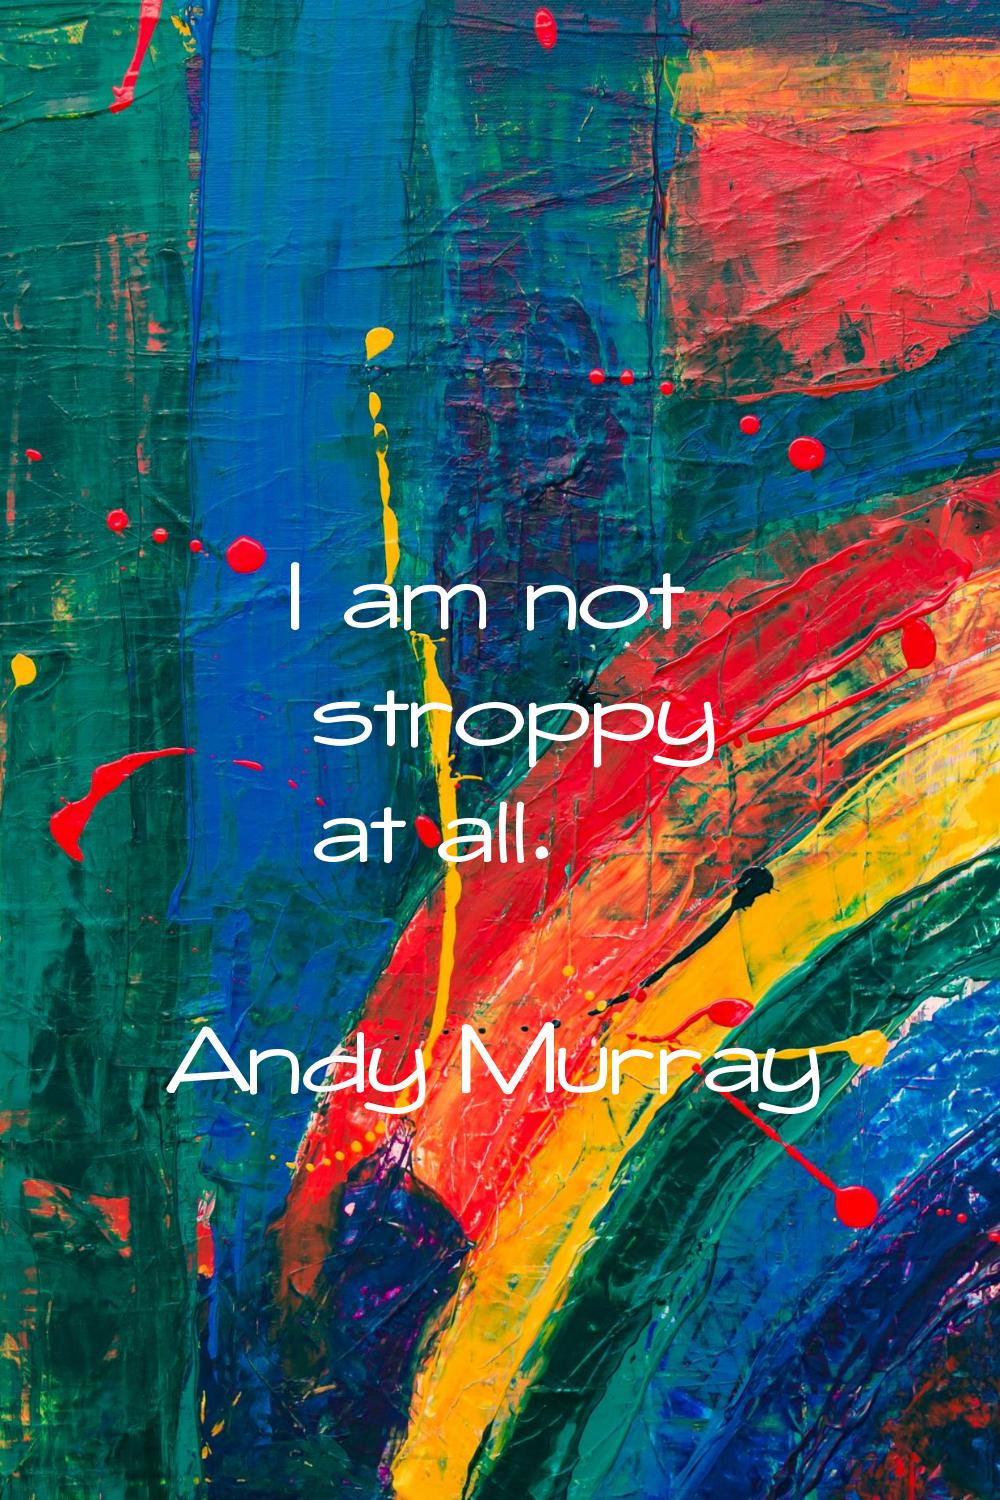 I am not stroppy at all.